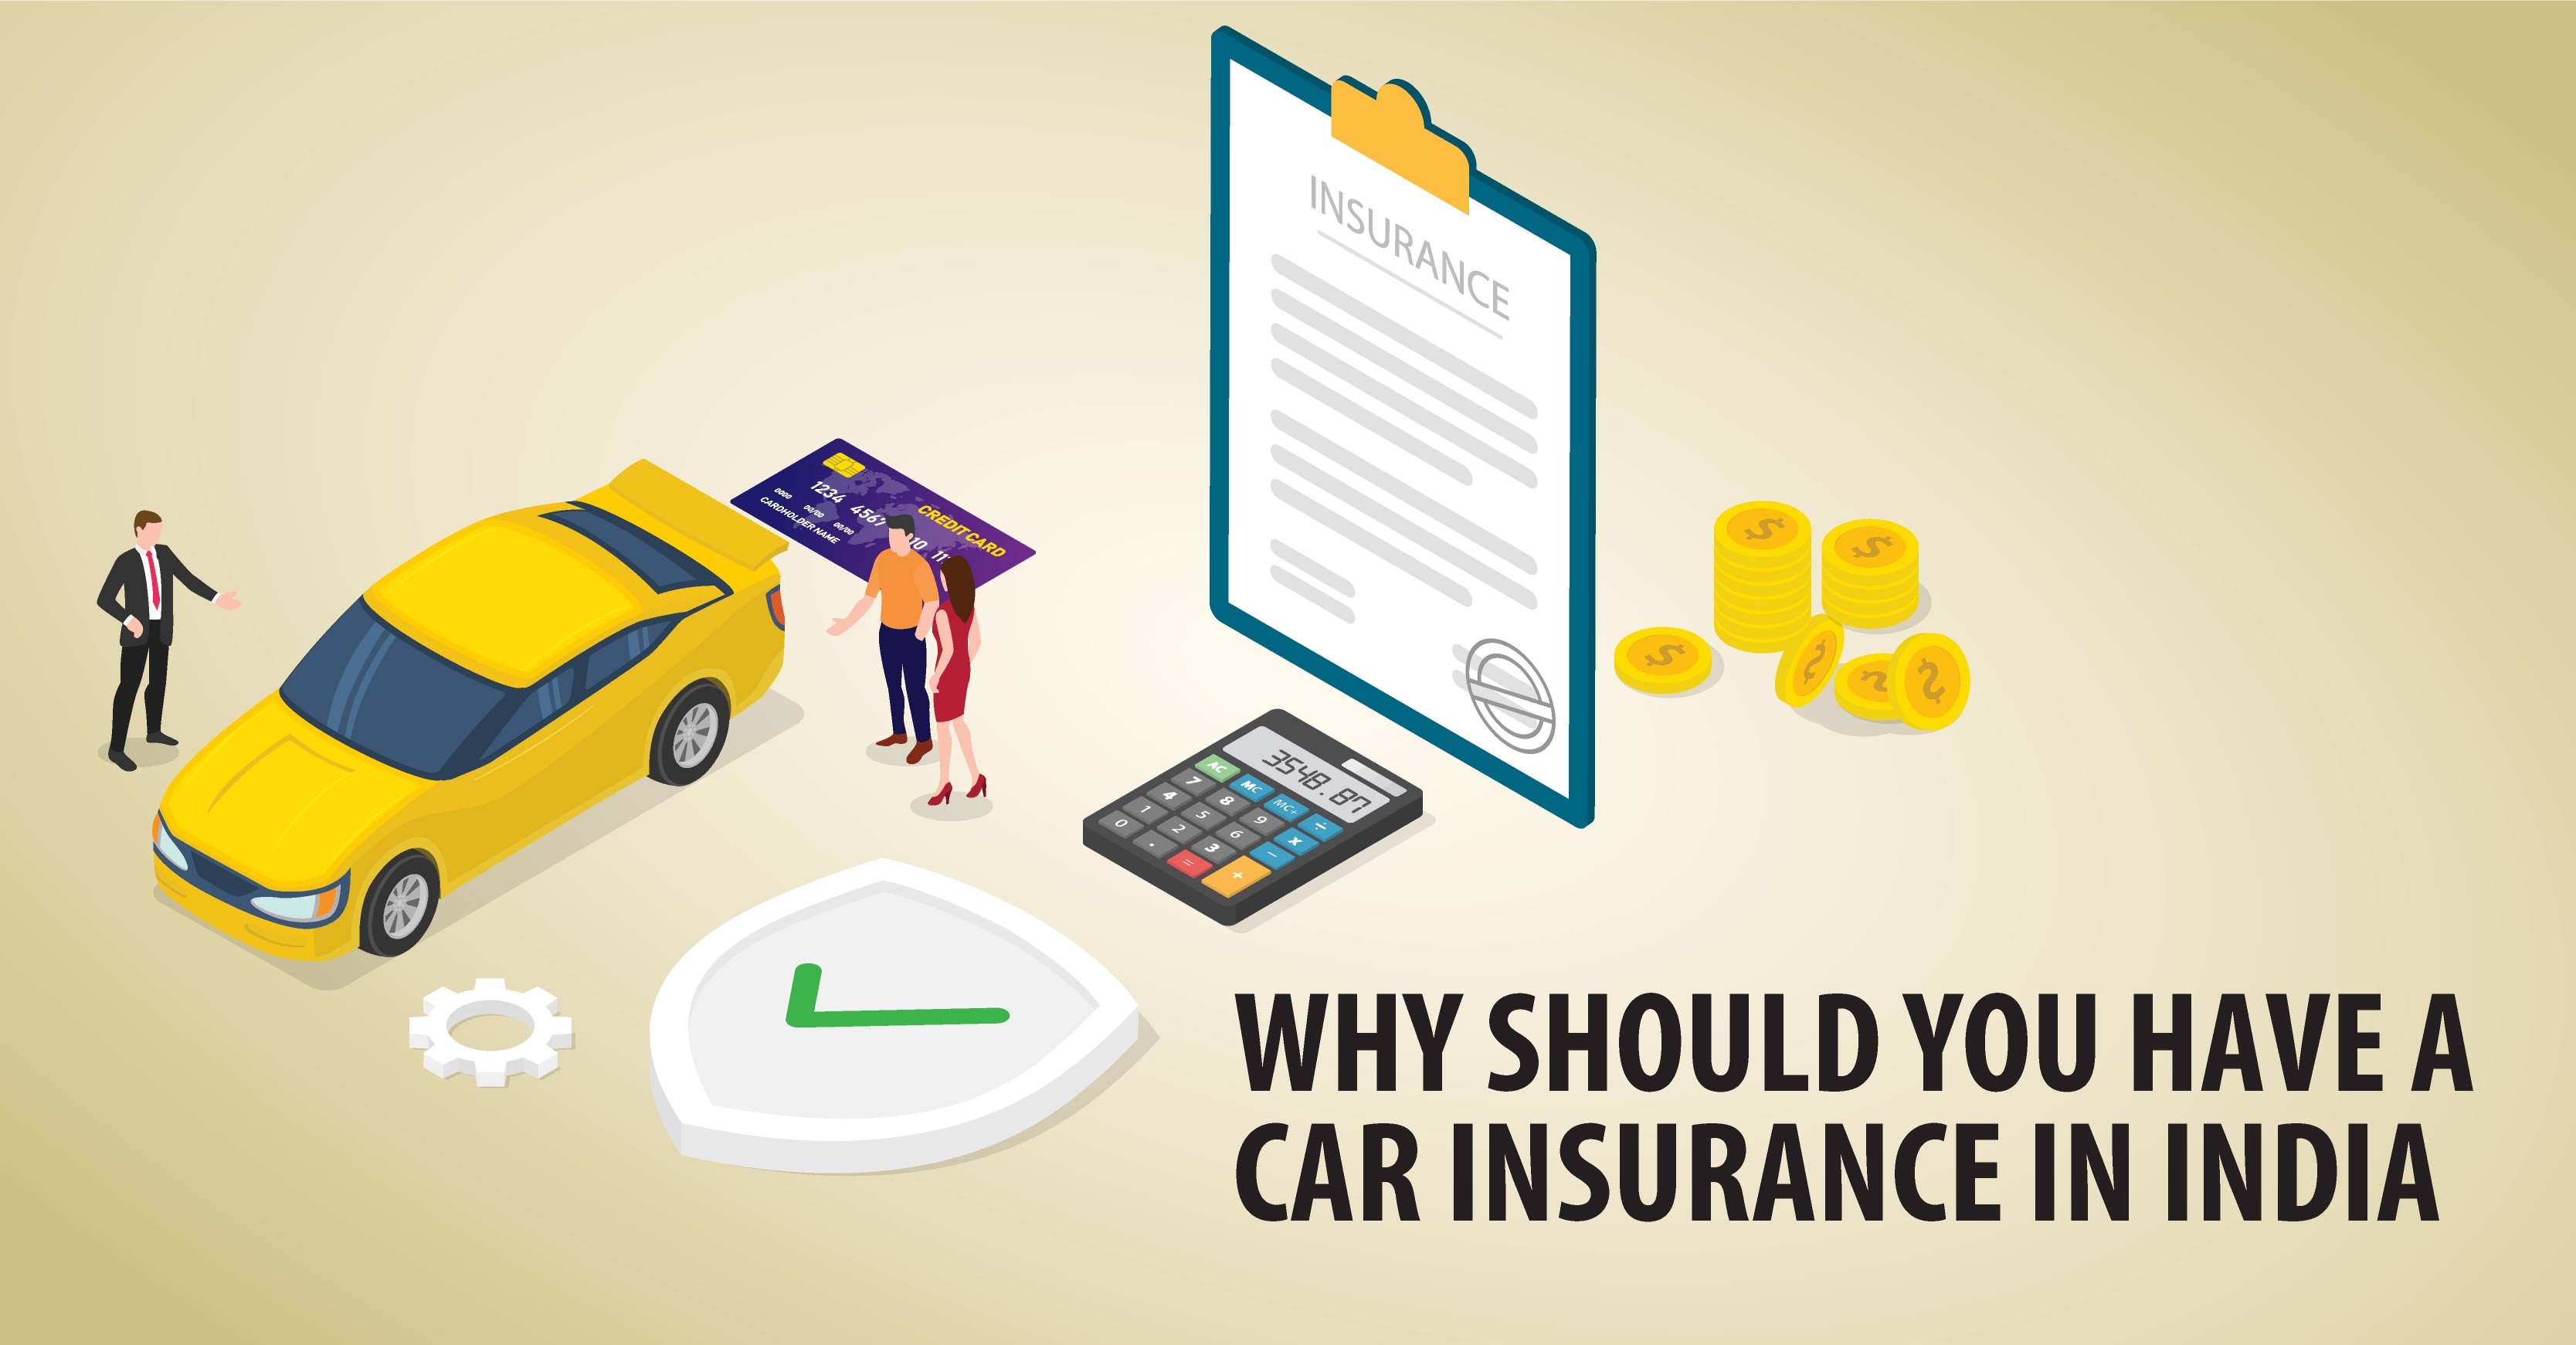 Why Should You Have a Car Insurance in India